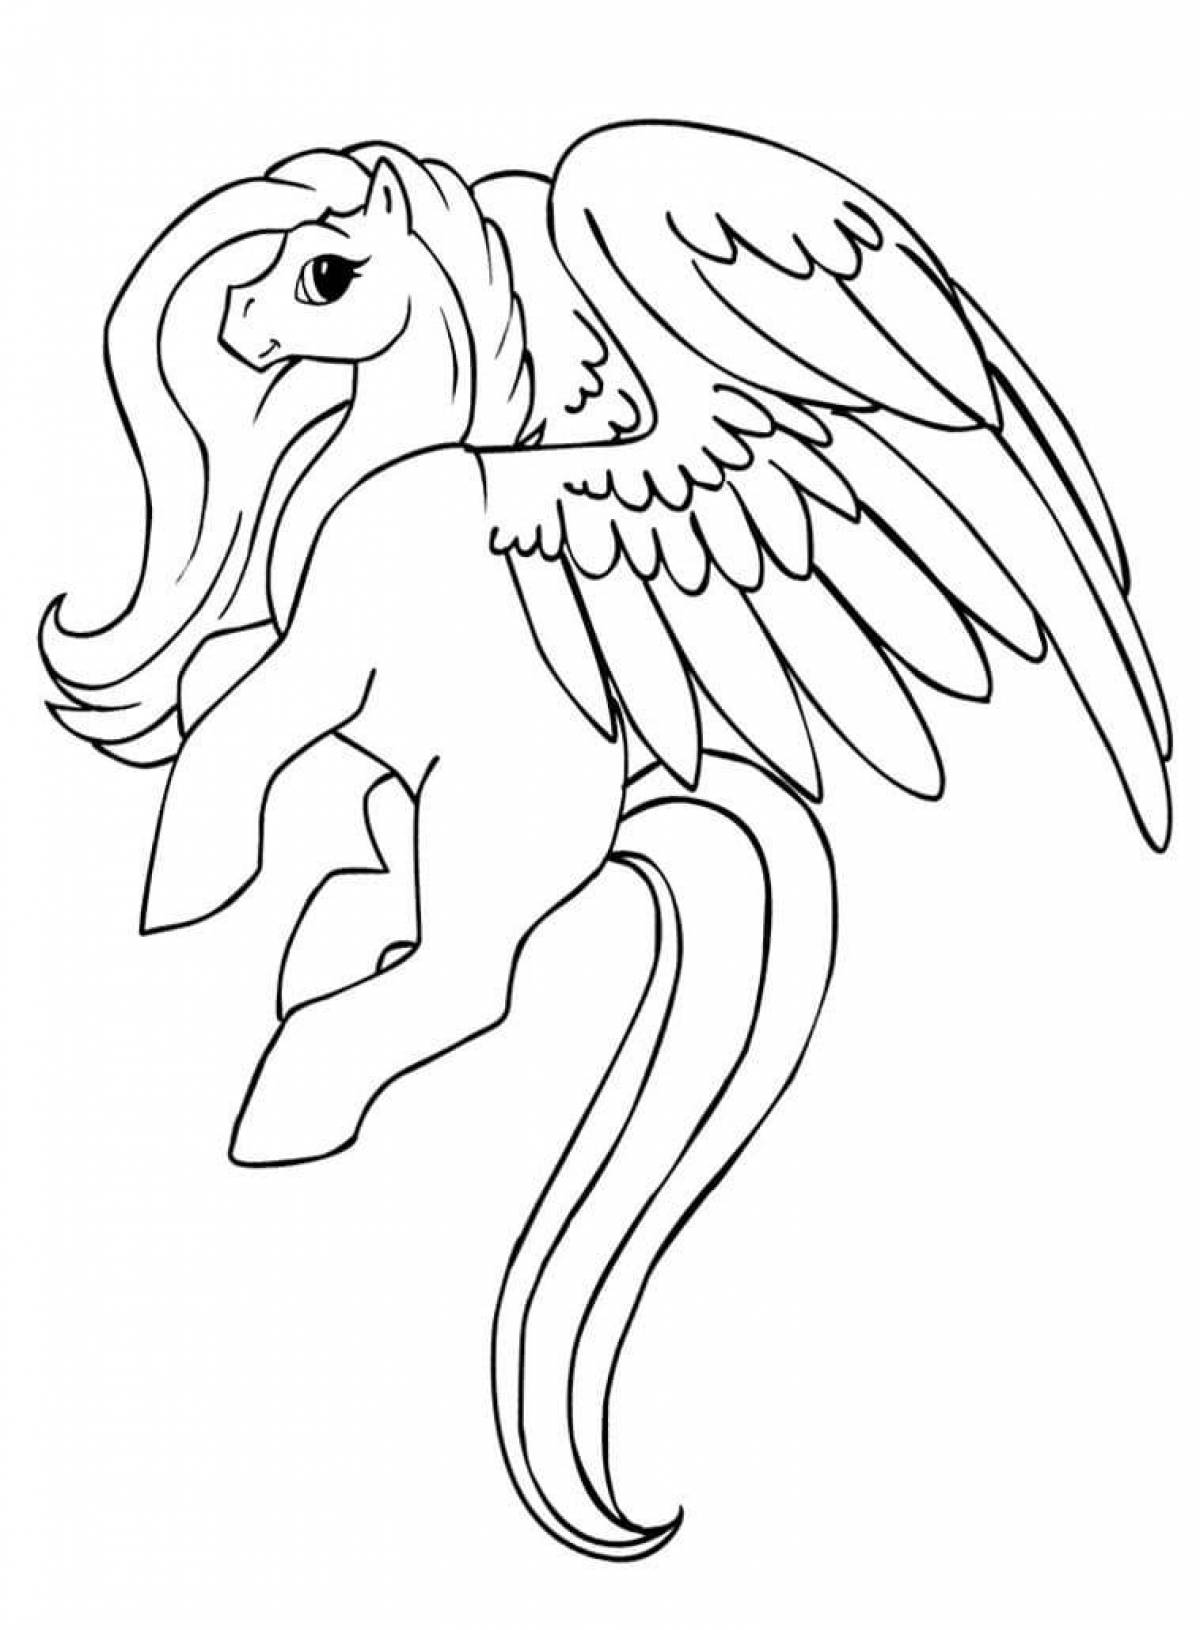 Coloring unicorn with wings